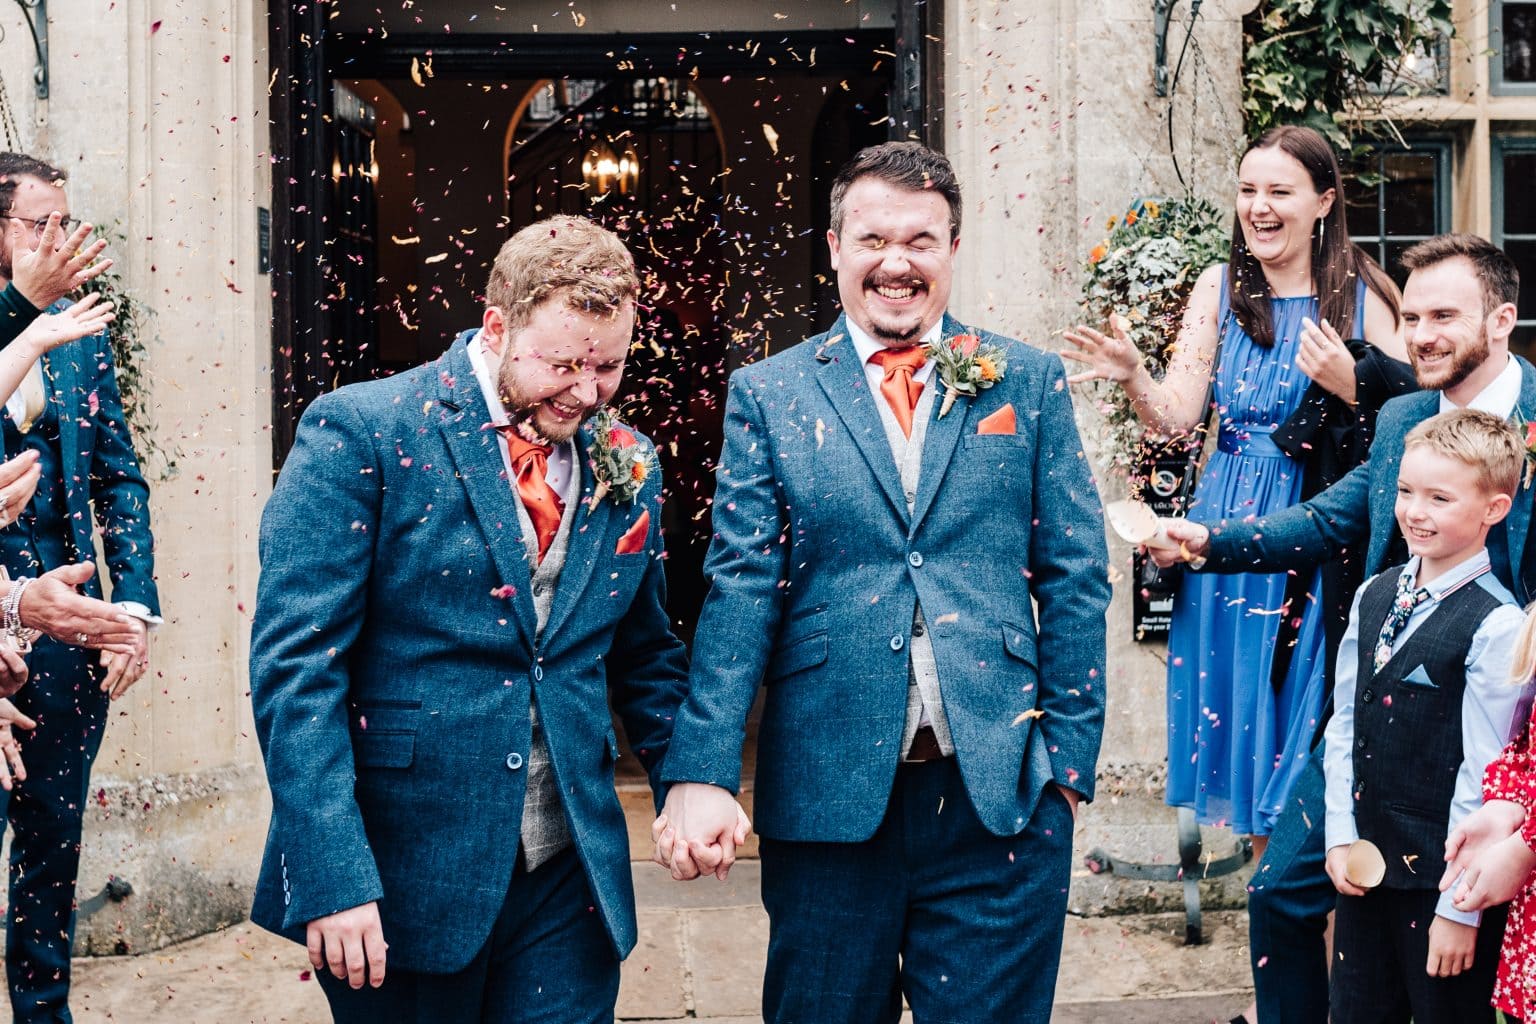 Confetti covers the two grooms at The Hare and Hounds Hotel in Tetbury